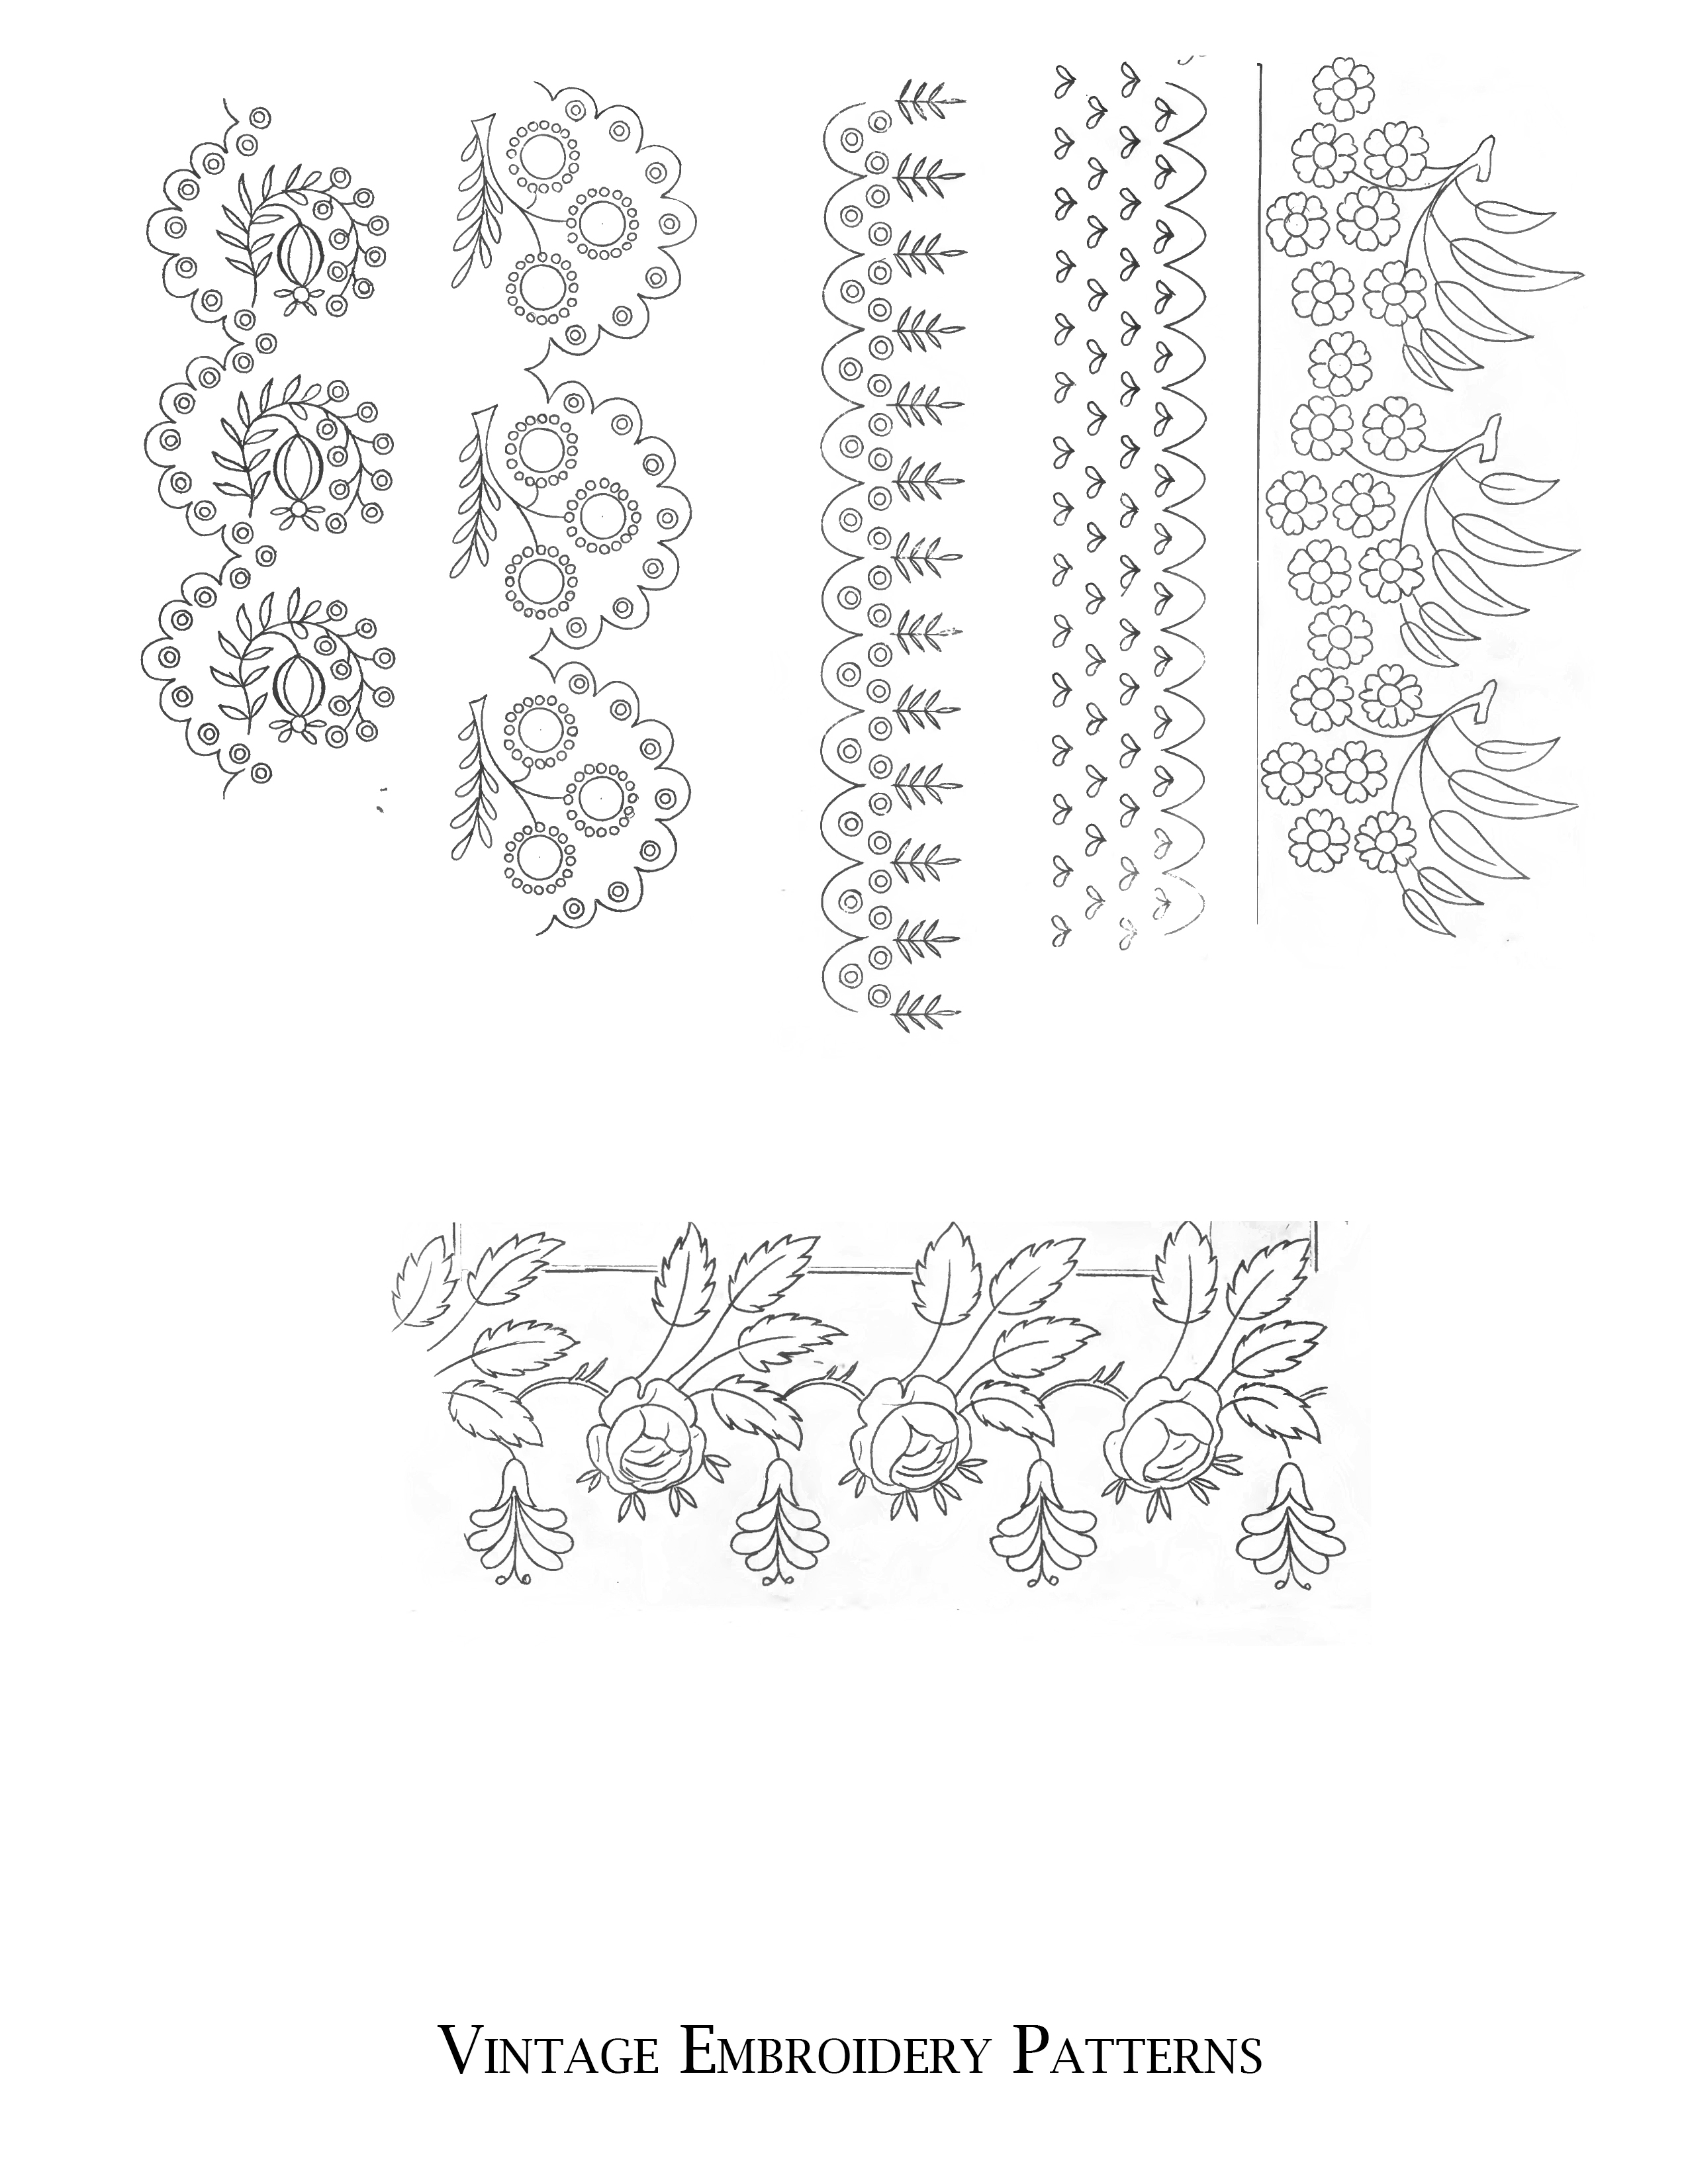 Vintage Embroidery Patterns Free Embroidery Patterns Archives Page 2 Of 2 The Graffical Muse